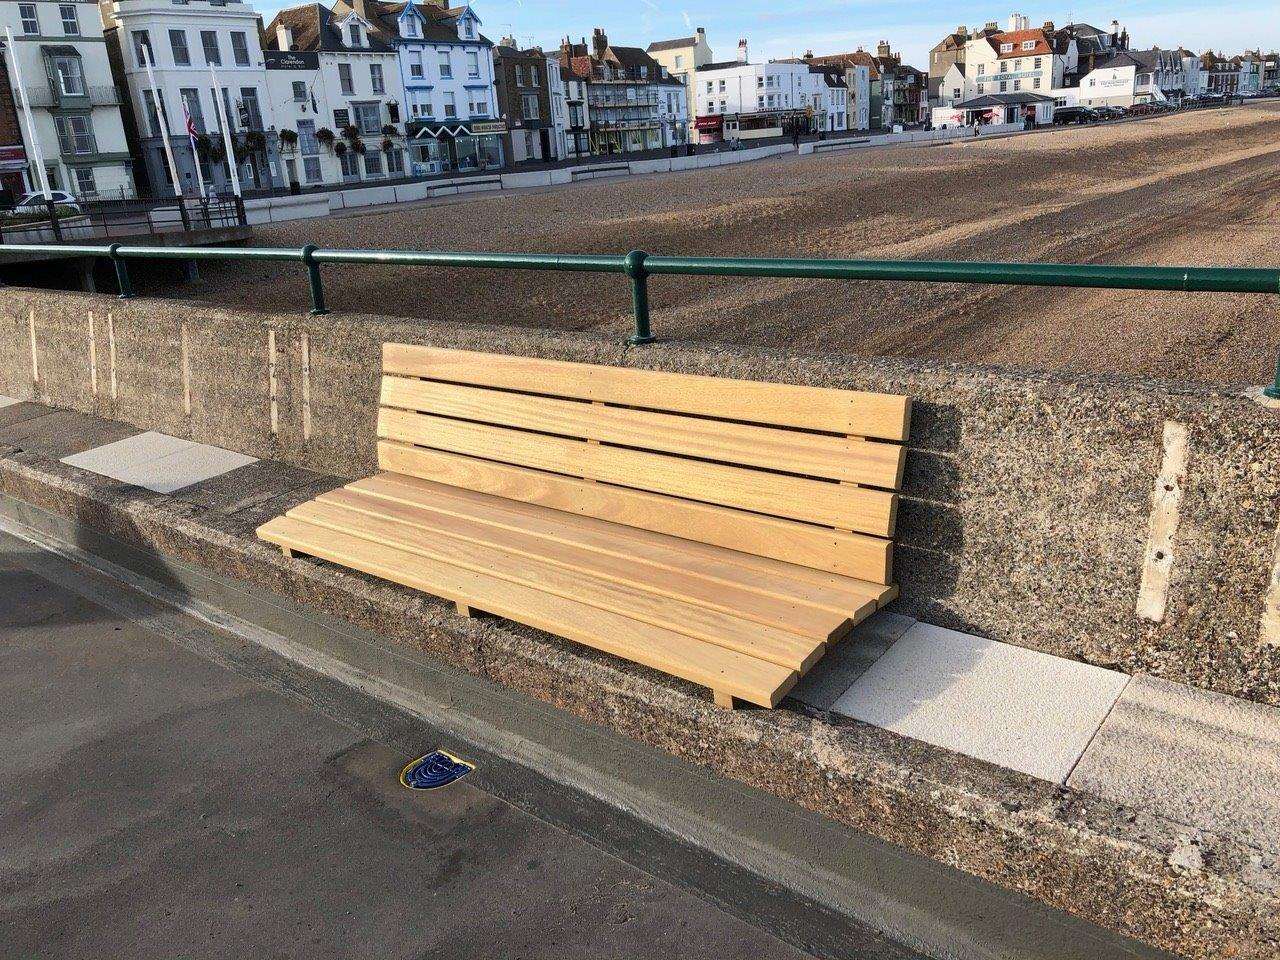 New seating along Deal Pier is part of the final phase of the landmark's revamp